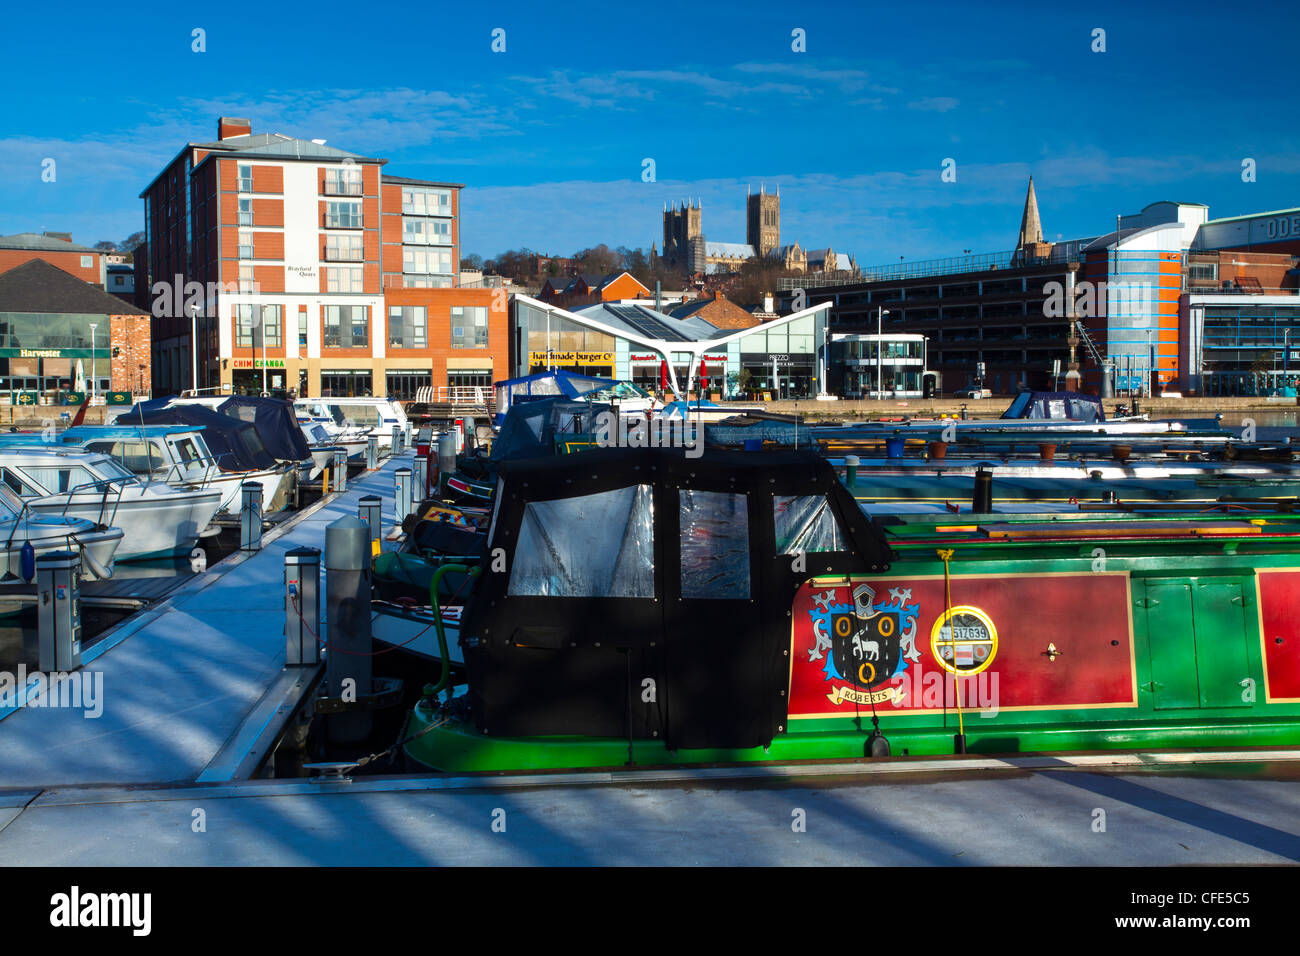 England, Lincolnshire, Lincoln. Brayford Quays, a waterfront development in the City of Lincoln located on the Brayford Pool. Stock Photo